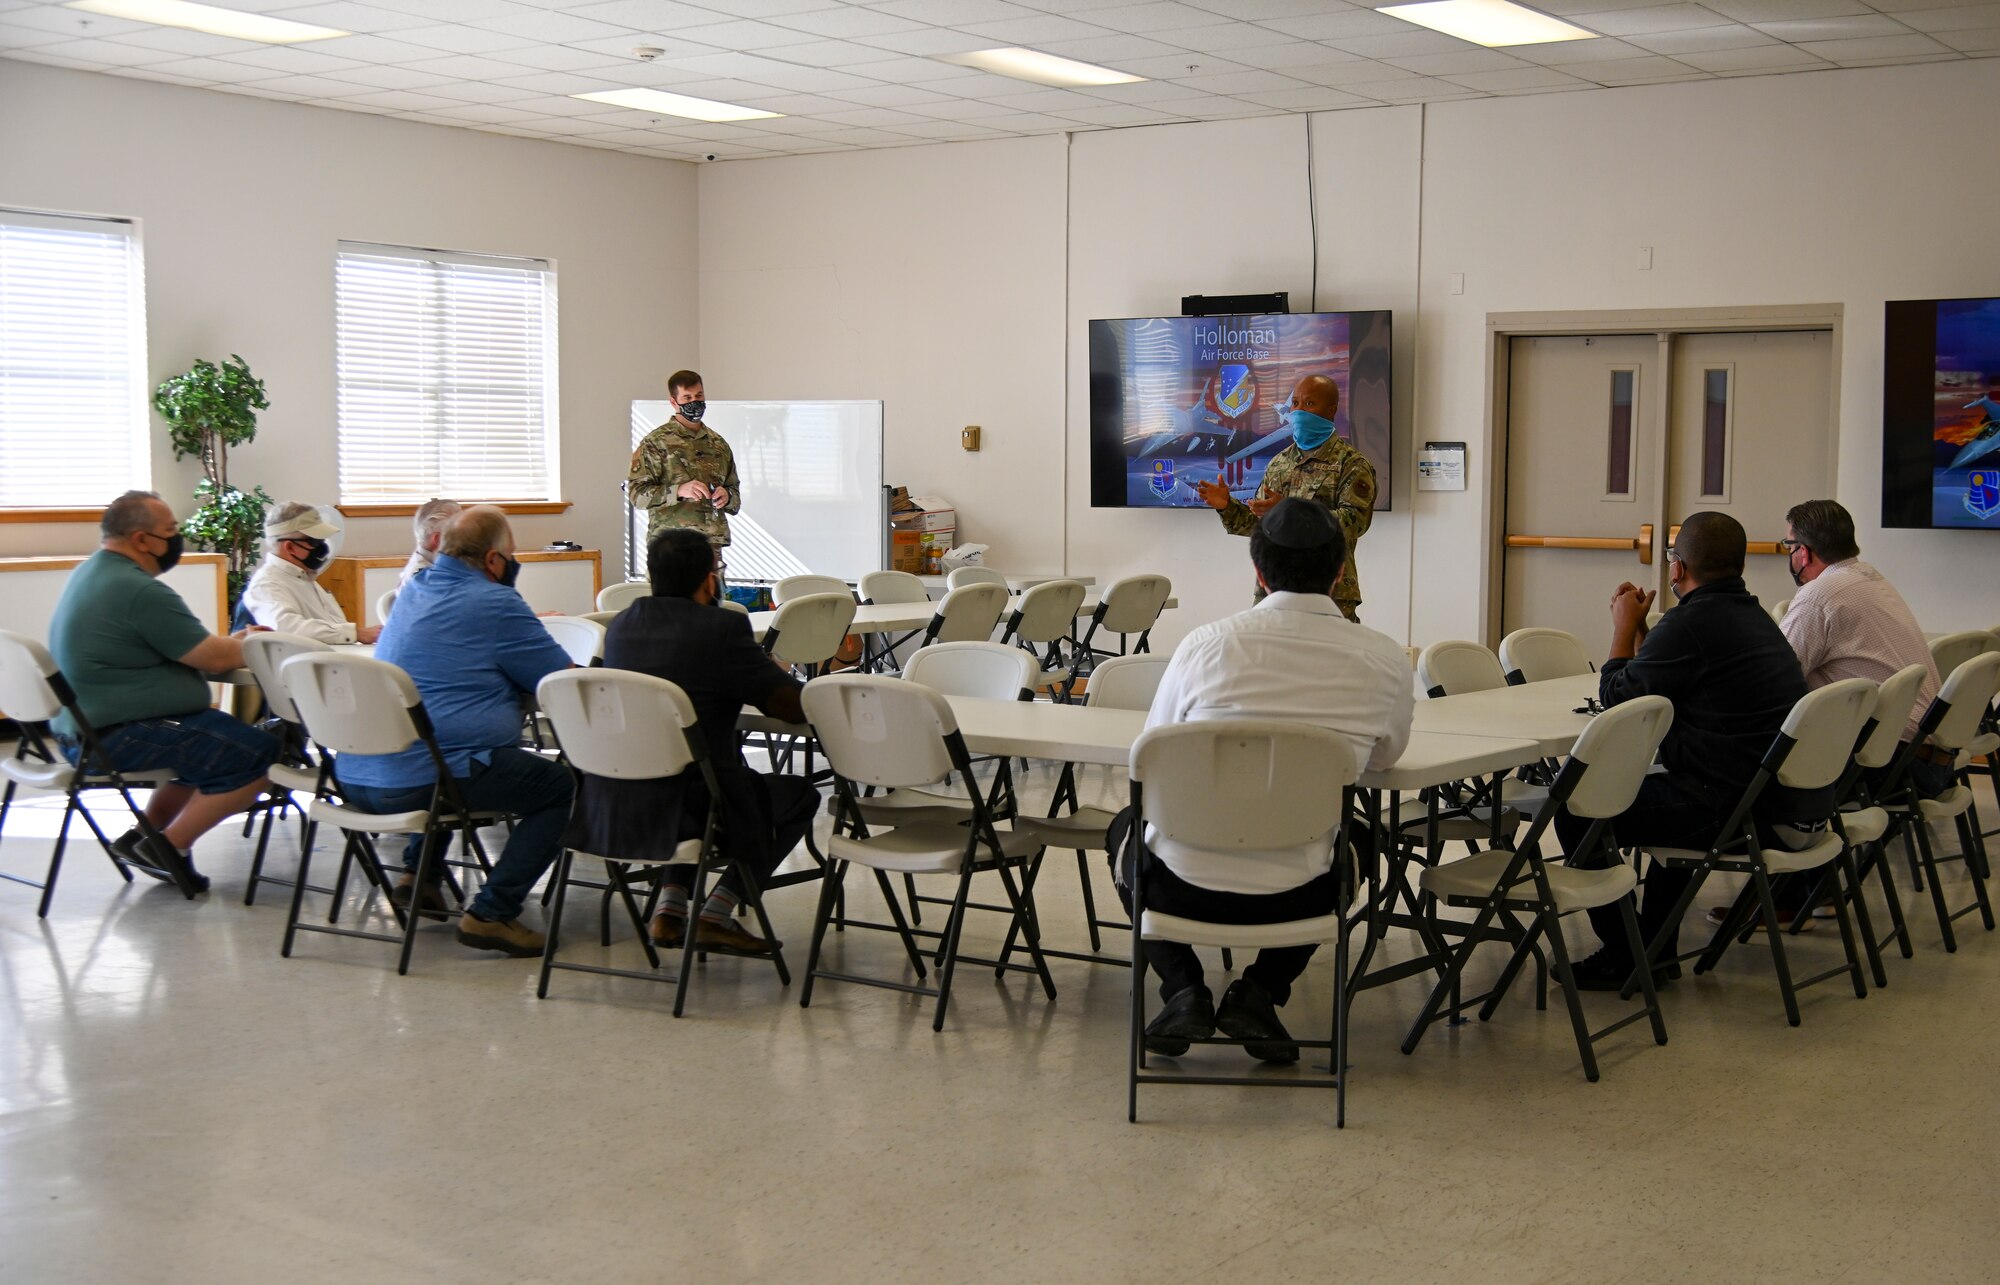 Capt. Charles Ugo, 49th Wing chaplain, welcomes local clergy to a Clergy Day event, Nov. 4, 2021, on Holloman Air Force Base, New Mexico. Clergy Day is an annual event the Holloman AFB Chaplain Corps hosts to forge rapport and relationships with local clergy of all faith backgrounds who support the Holloman community. (U.S. Air Force photo by Airman 1st Class Jessica Sanchez-Chen)